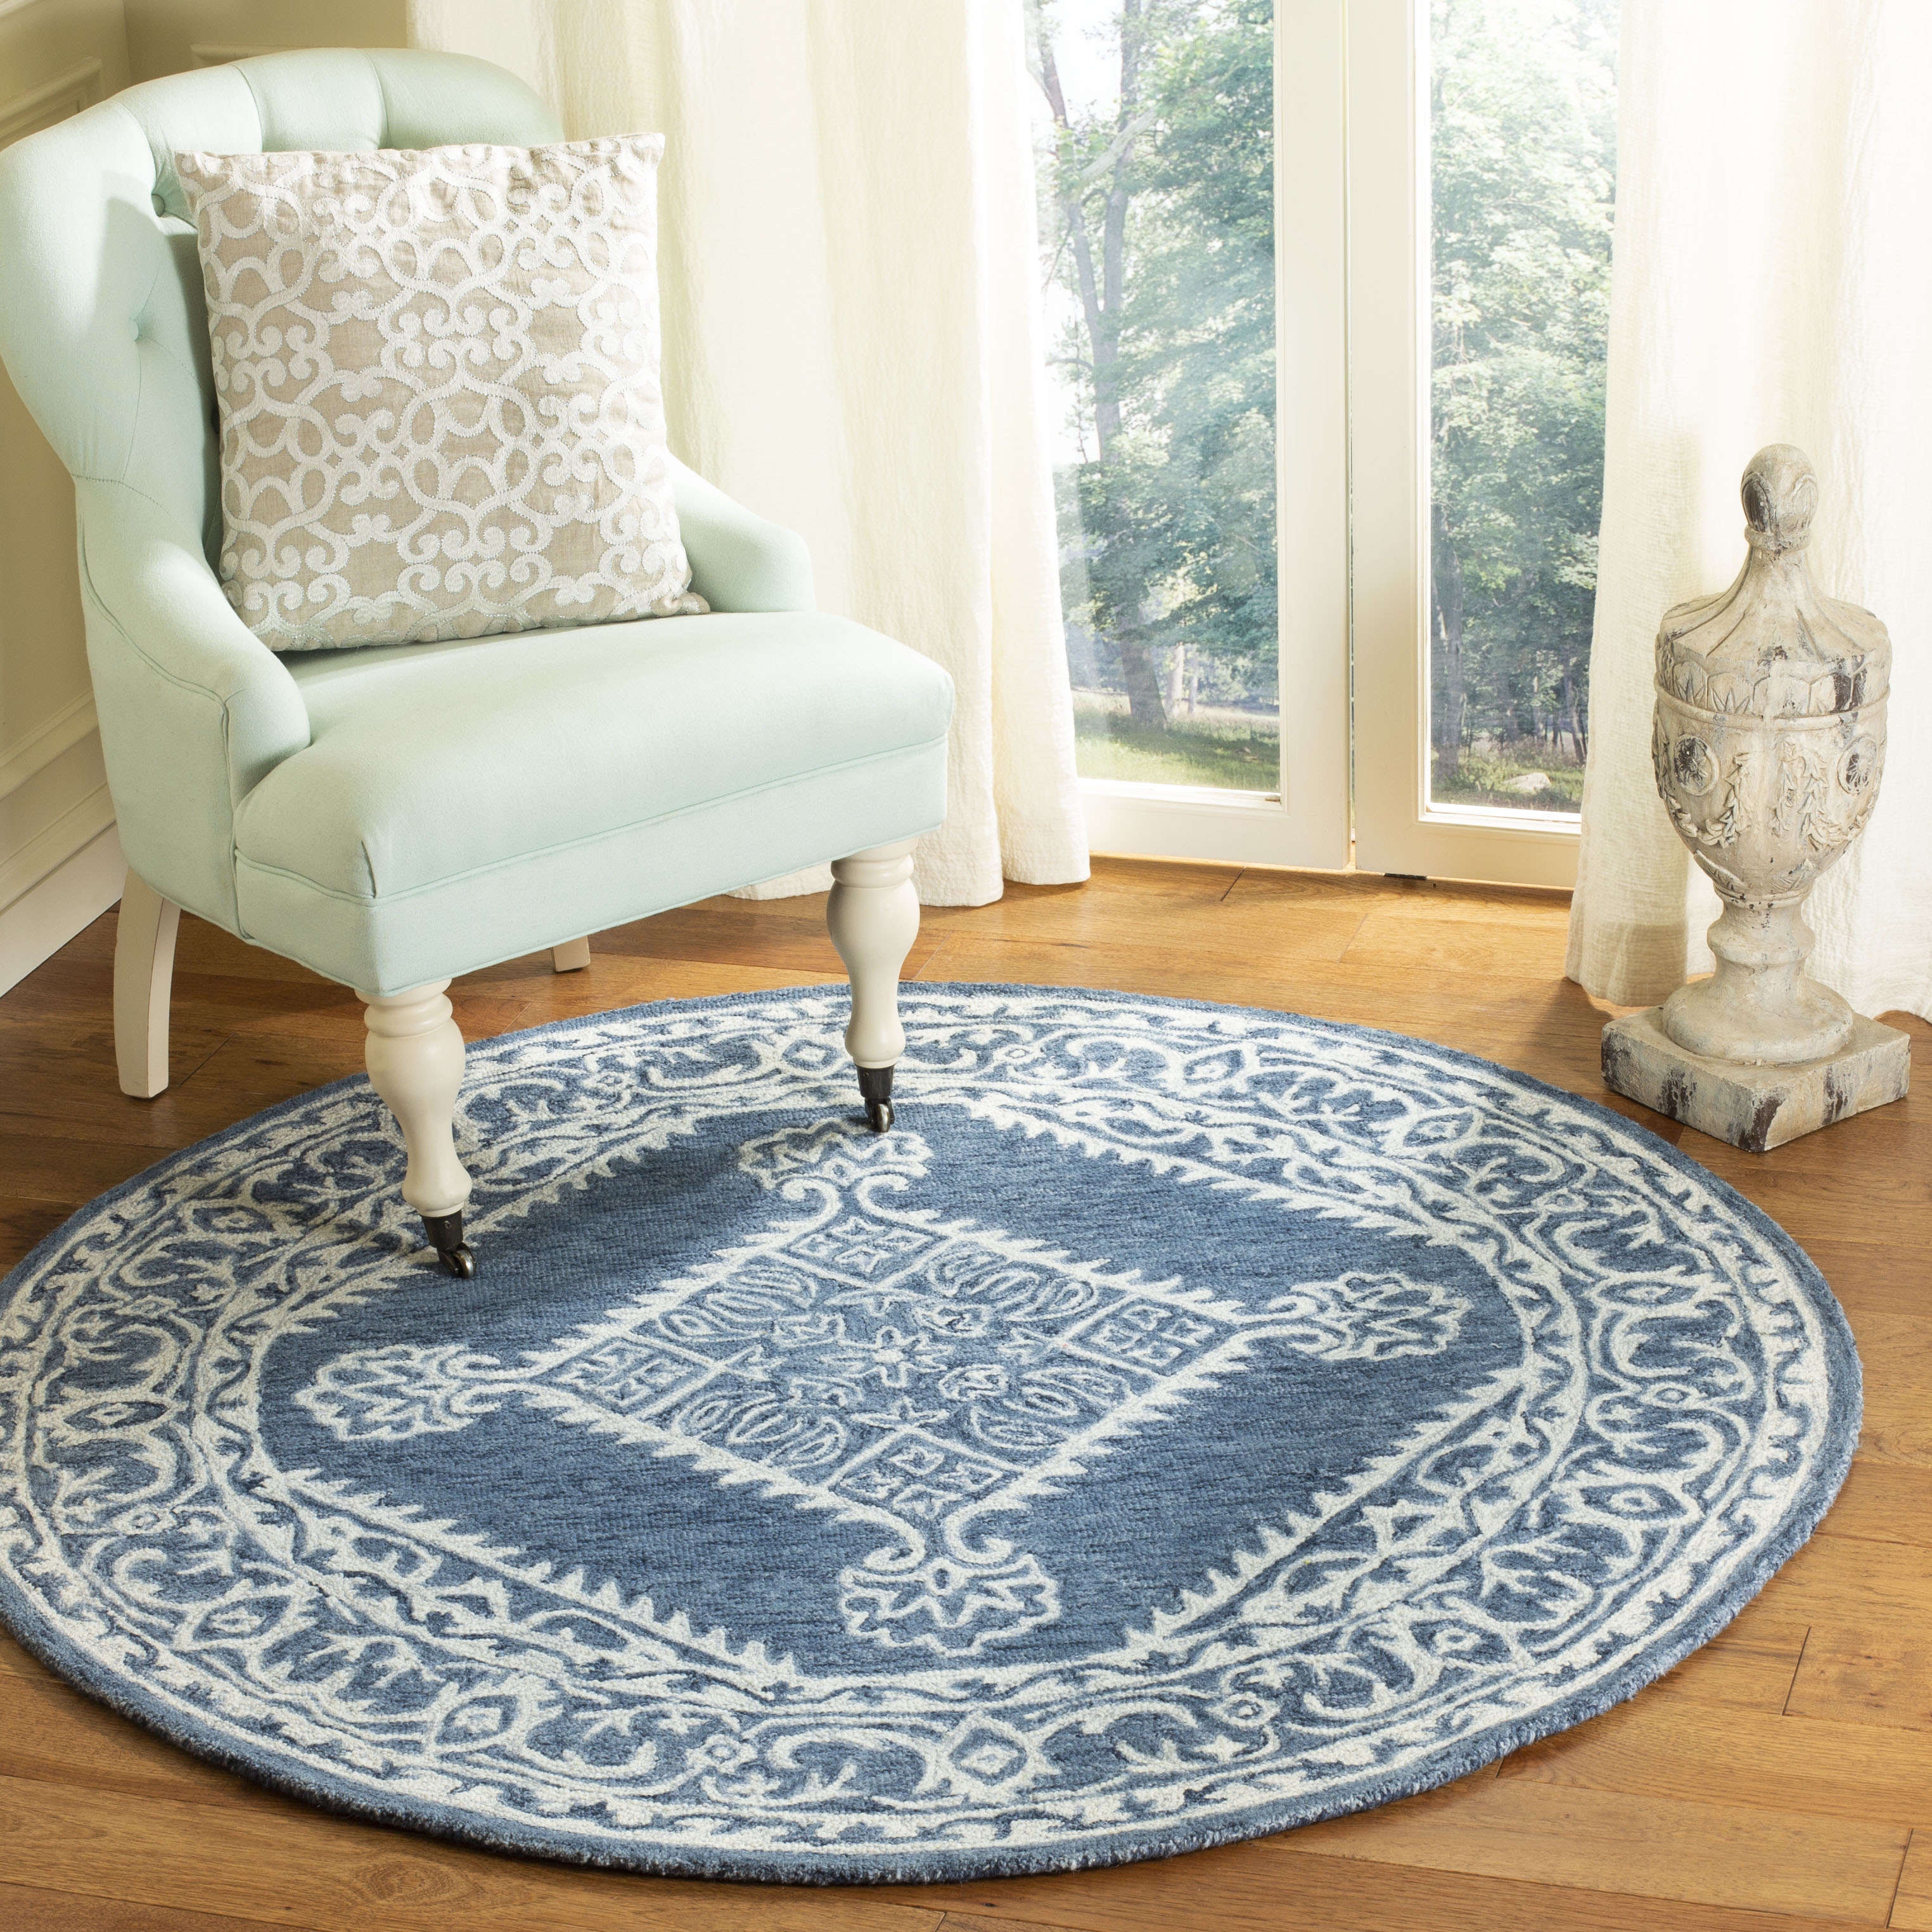 Arlo Home Hand Tufted Area Rug, MLP605M, Blue/Ivory,  5' X 5' Round - Image 1